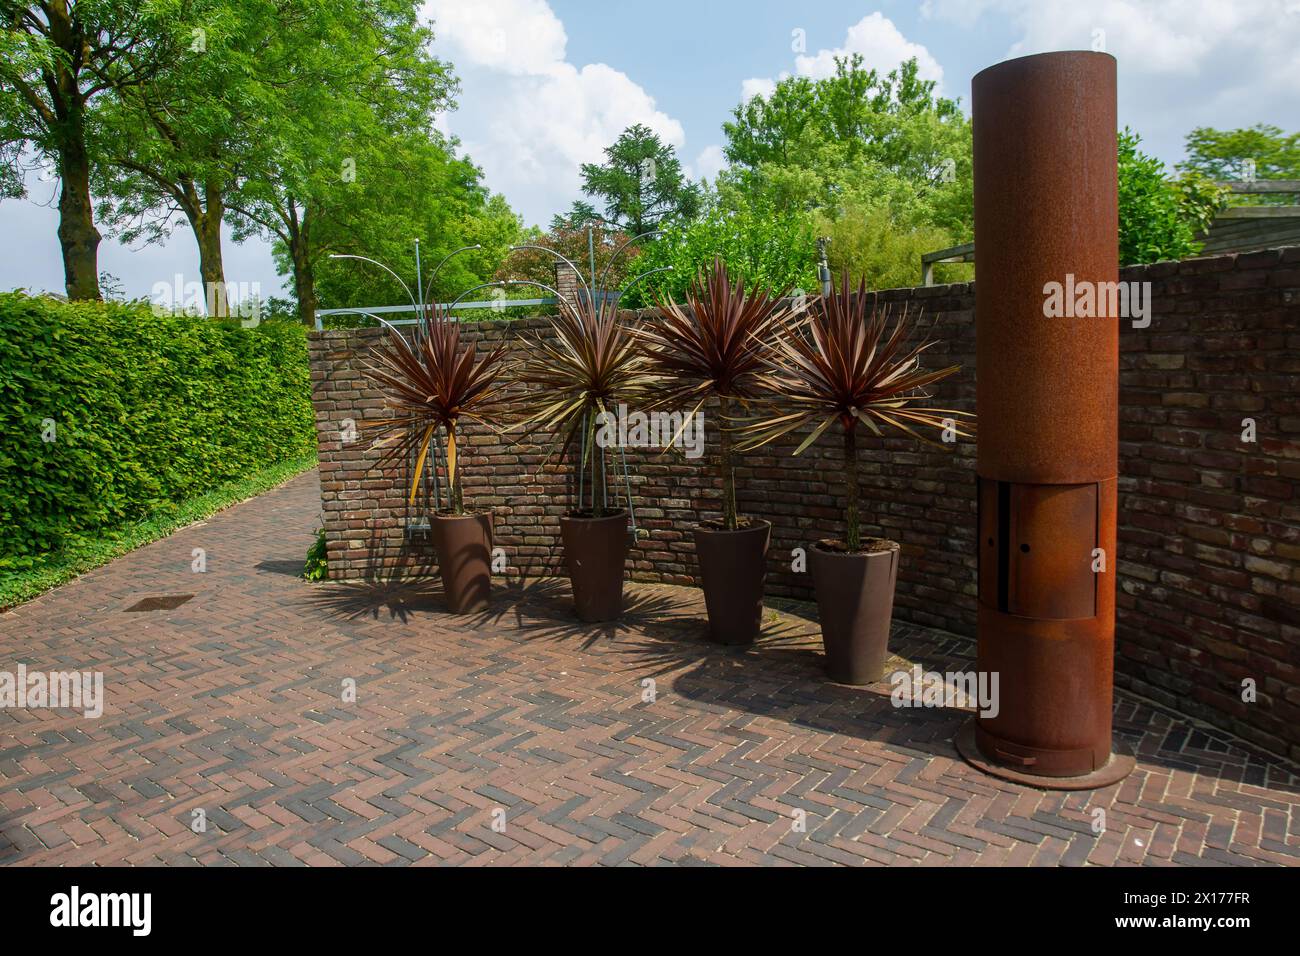 Some composition with potted plants (exotic plant - southern cordyline) and rusty metal pipe (Potebelly stove) in Fantastic May day Stock Photo